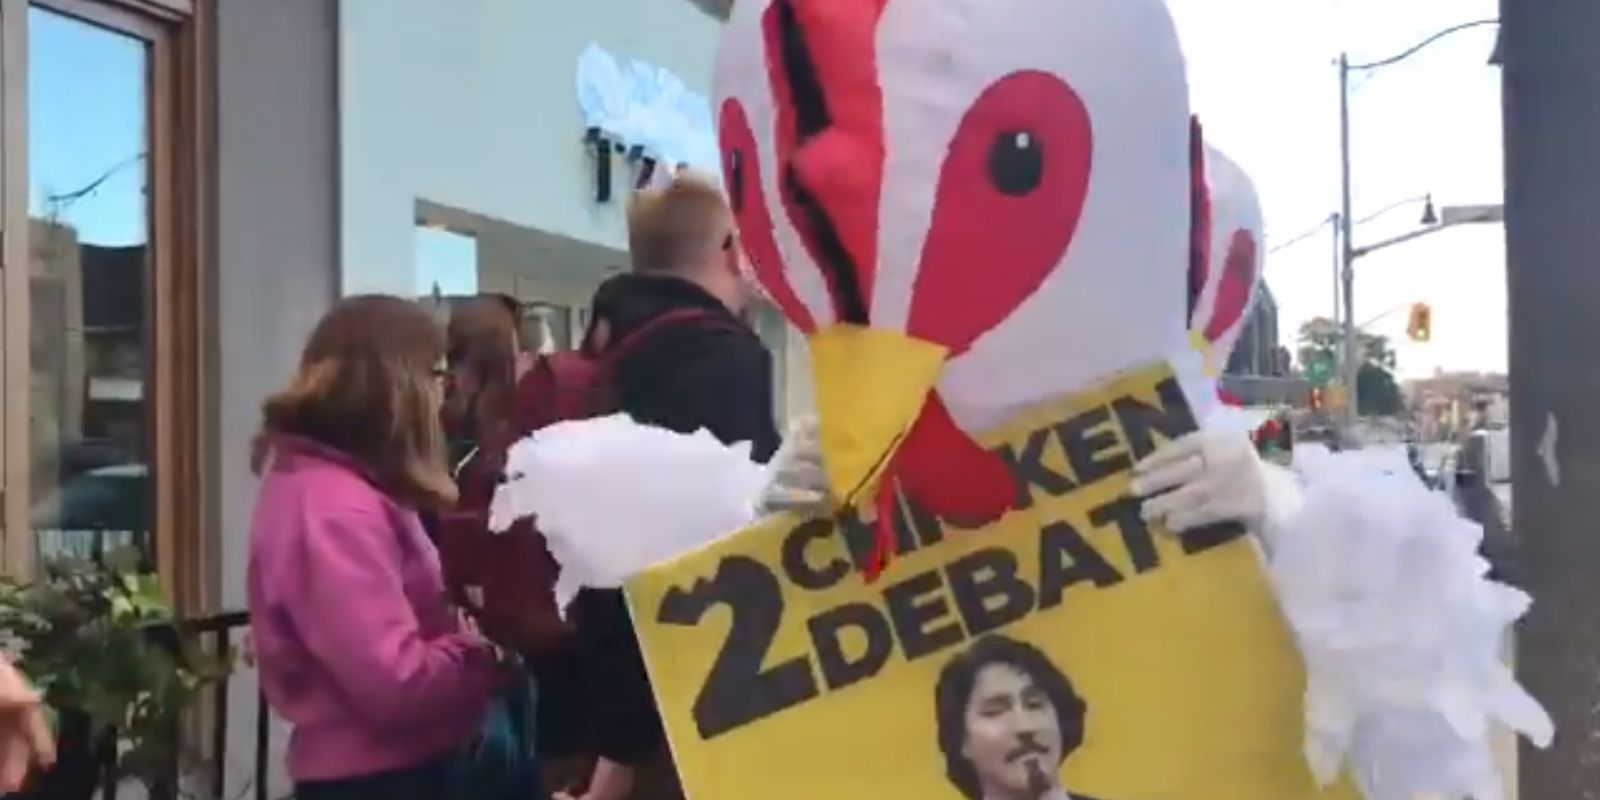 Protestors dressed as chickens confront Trudeau for “chickening” out of debate